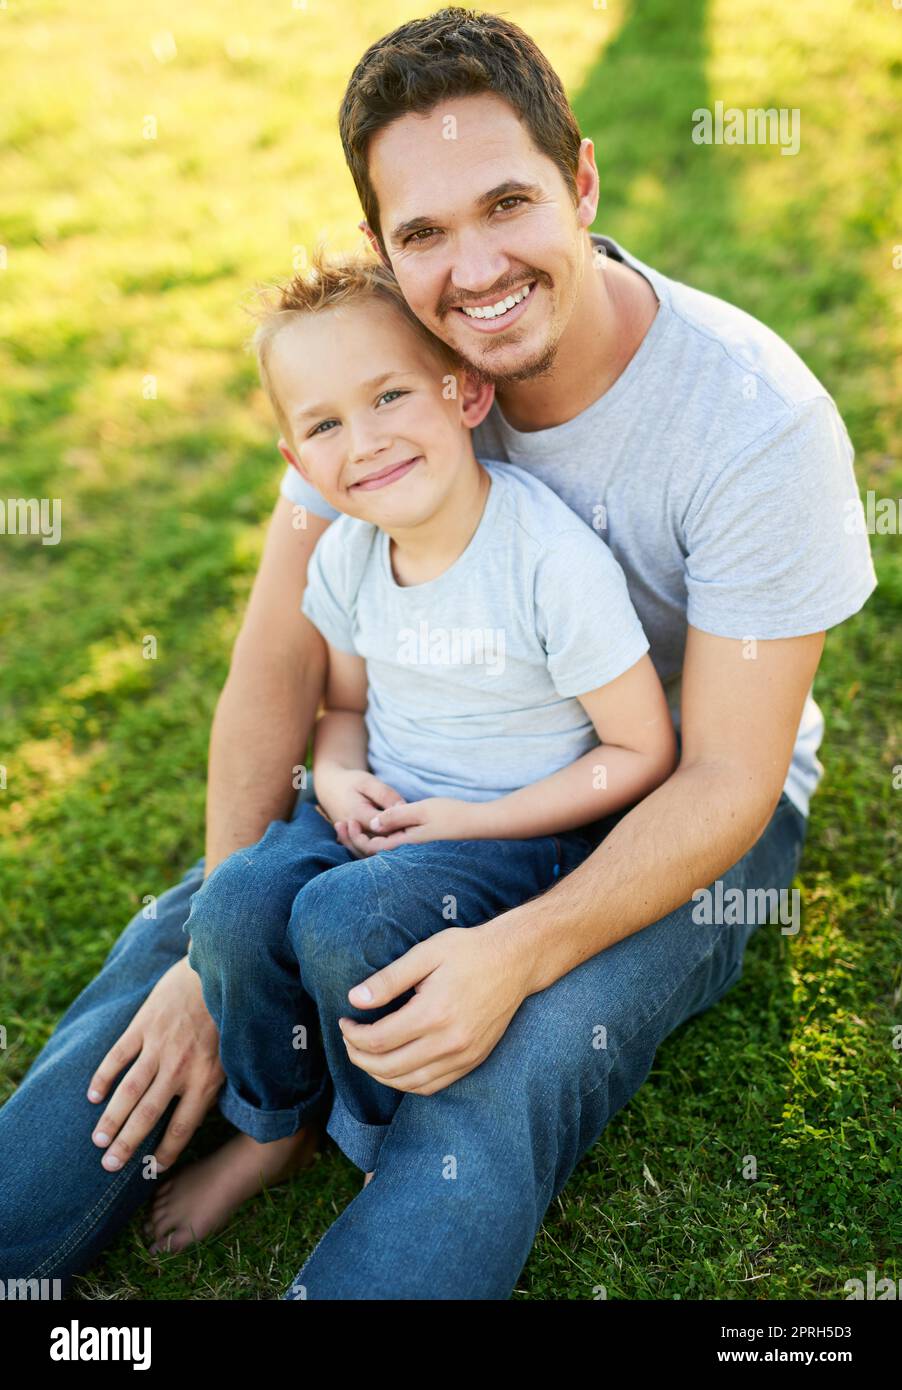 Quality time with dad. Portrait of a smiling father and his little son sitting on the grass in a park. Stock Photo